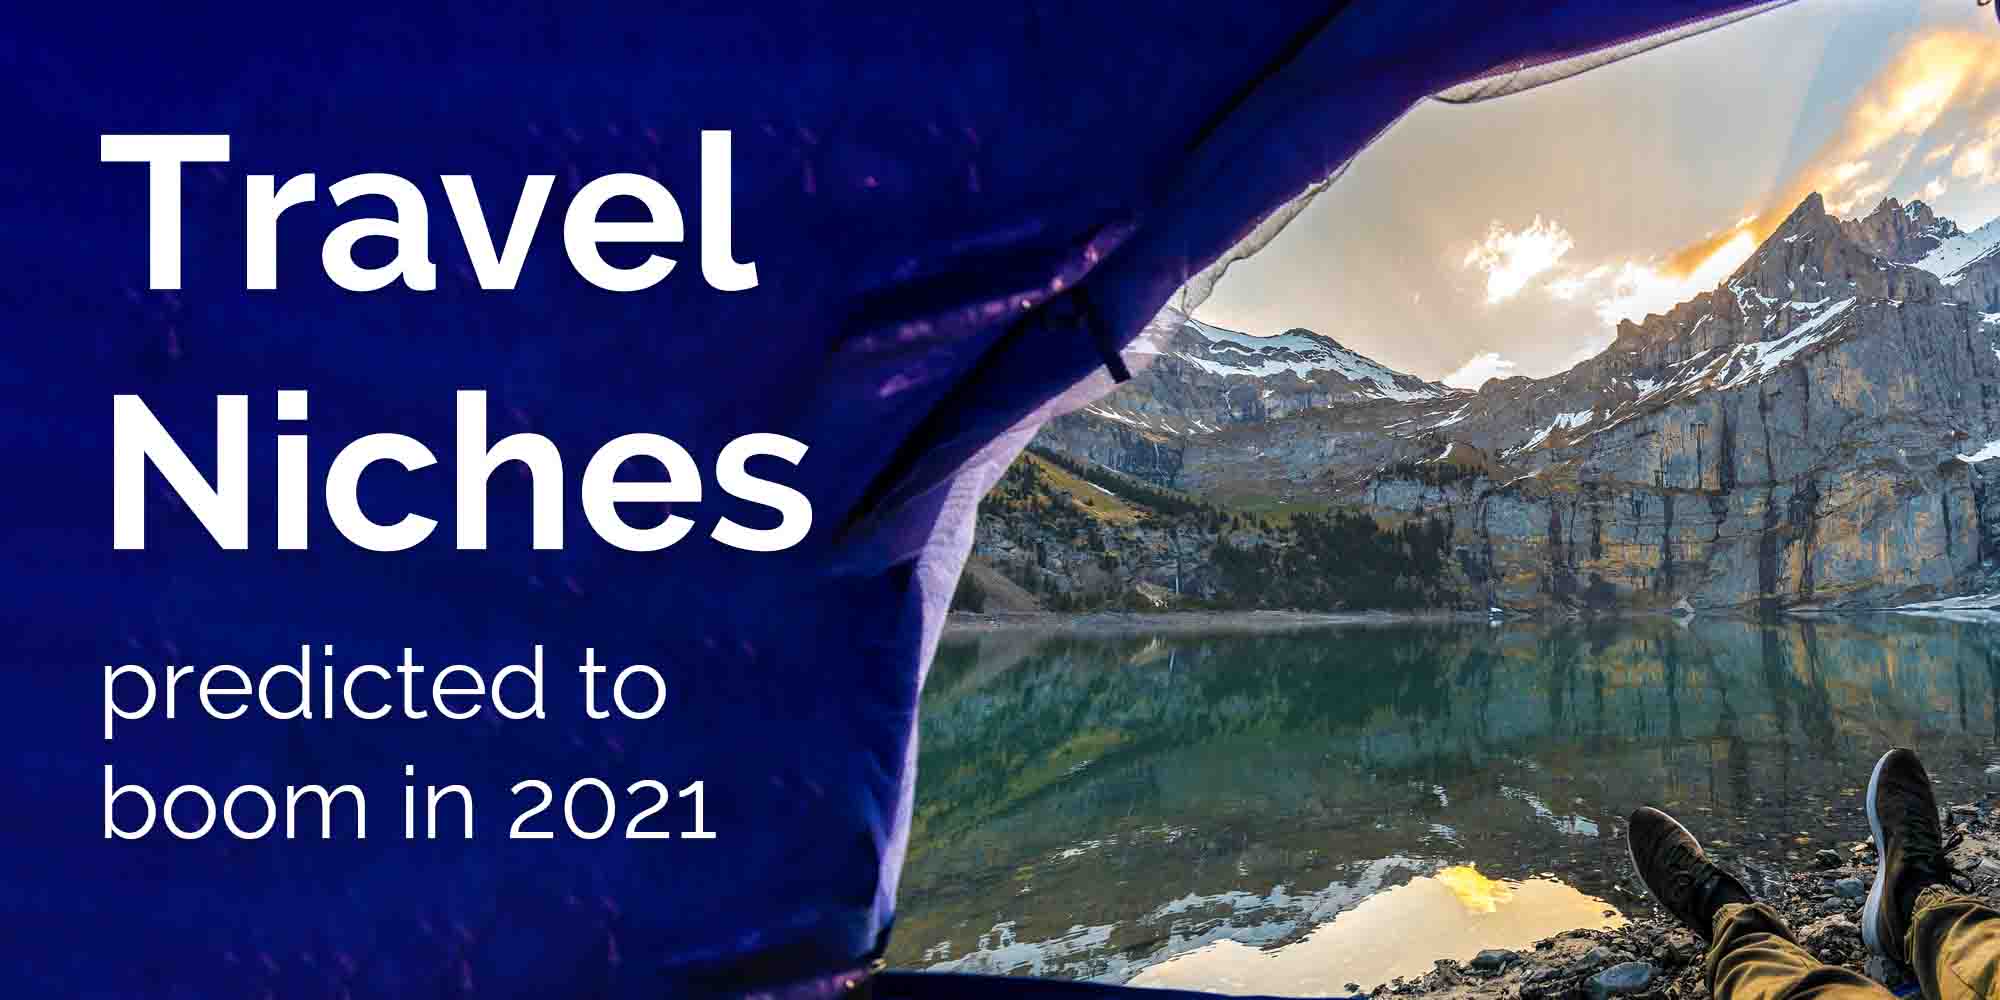 Travel niches predicted to boom in 2021